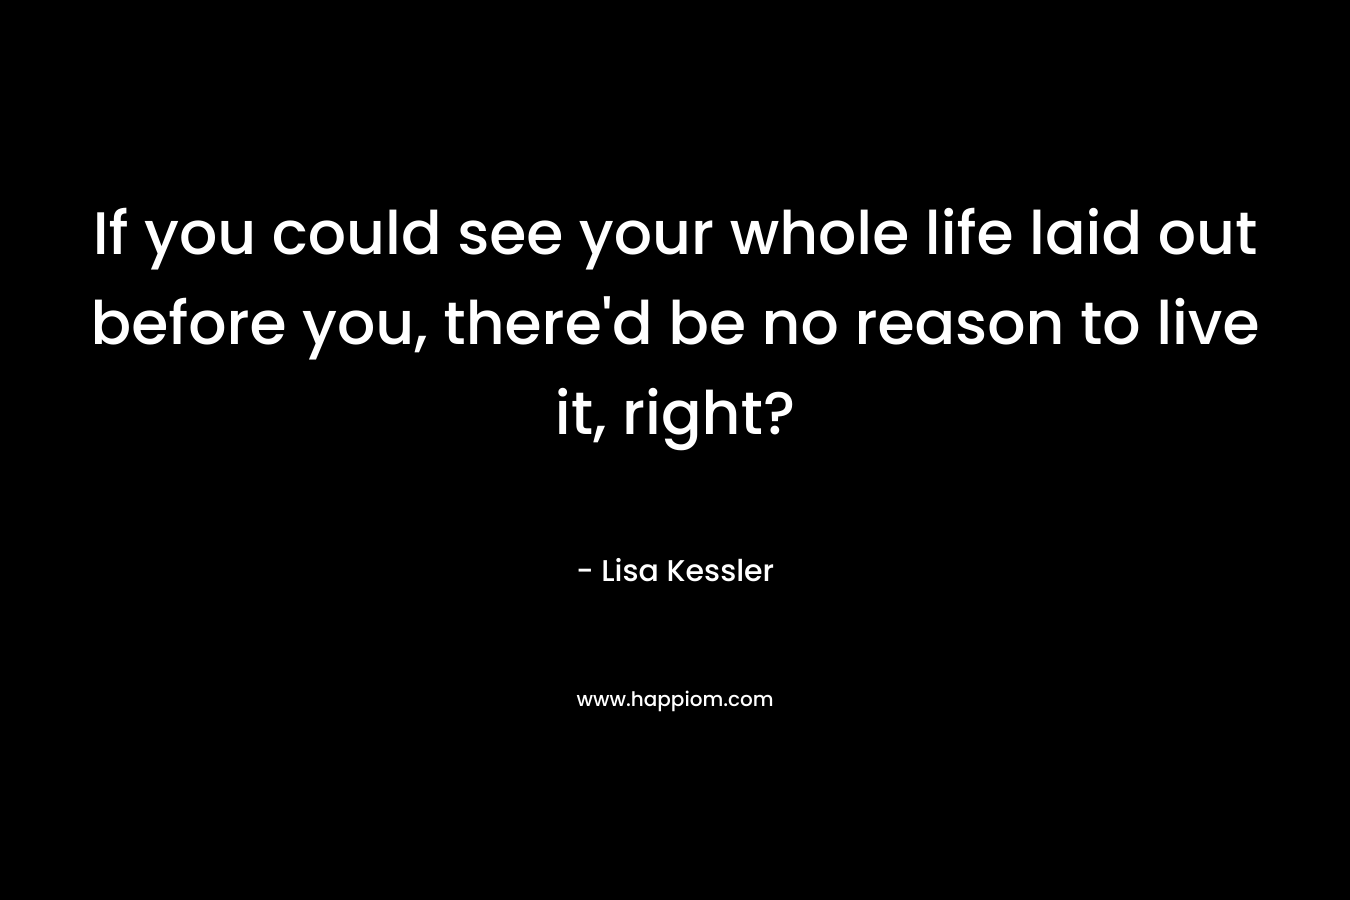 If you could see your whole life laid out before you, there'd be no reason to live it, right?